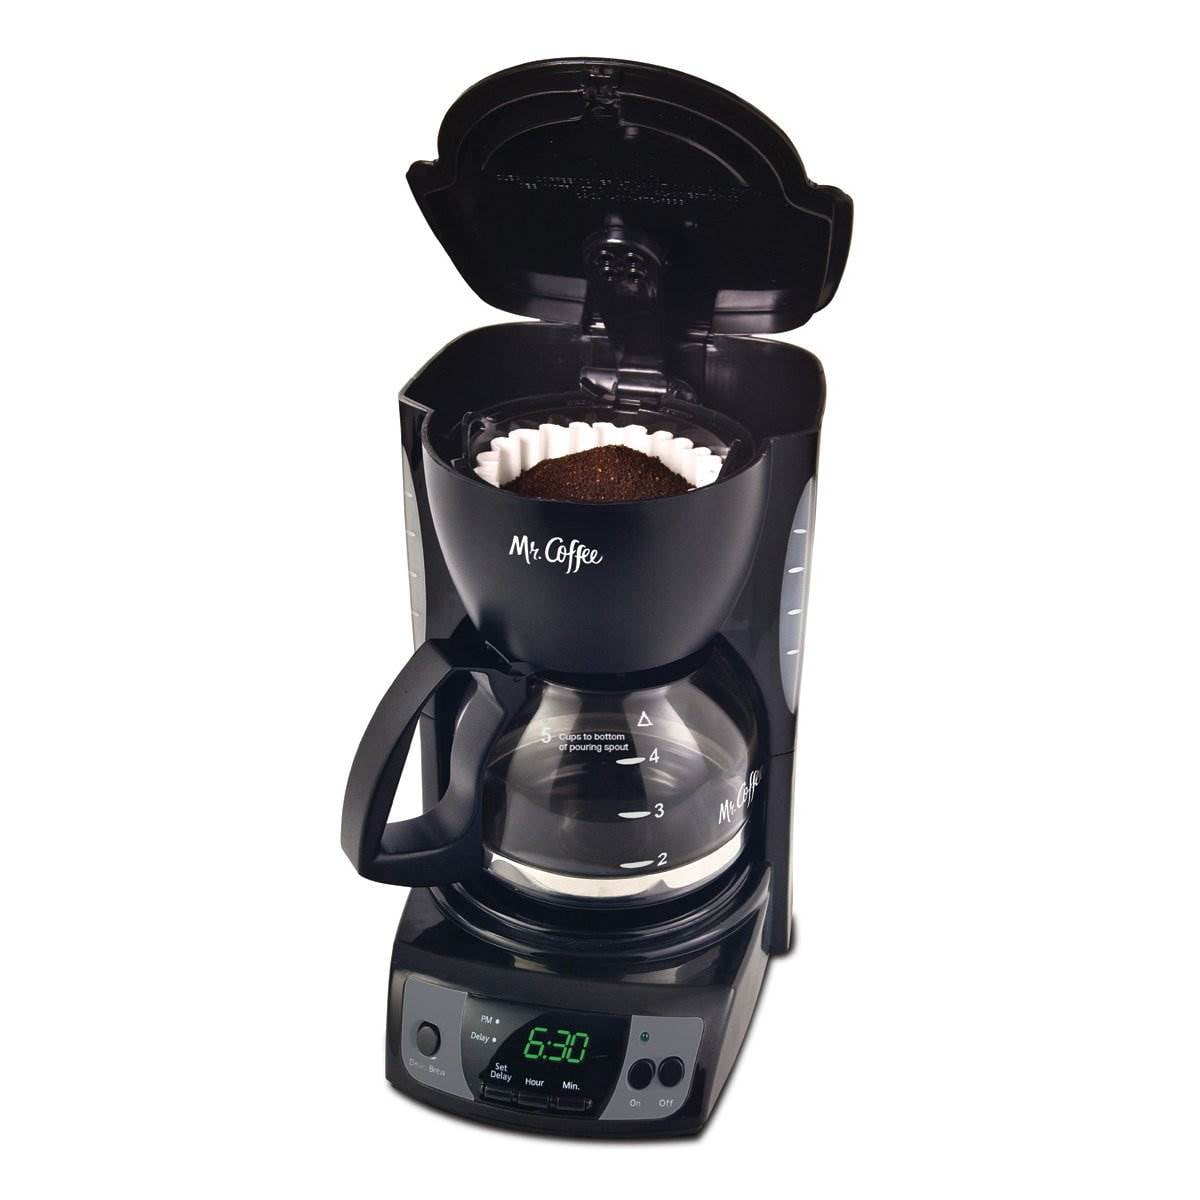 5-Cup Coffee Maker, Grab-A-Cup Auto Pause, Black